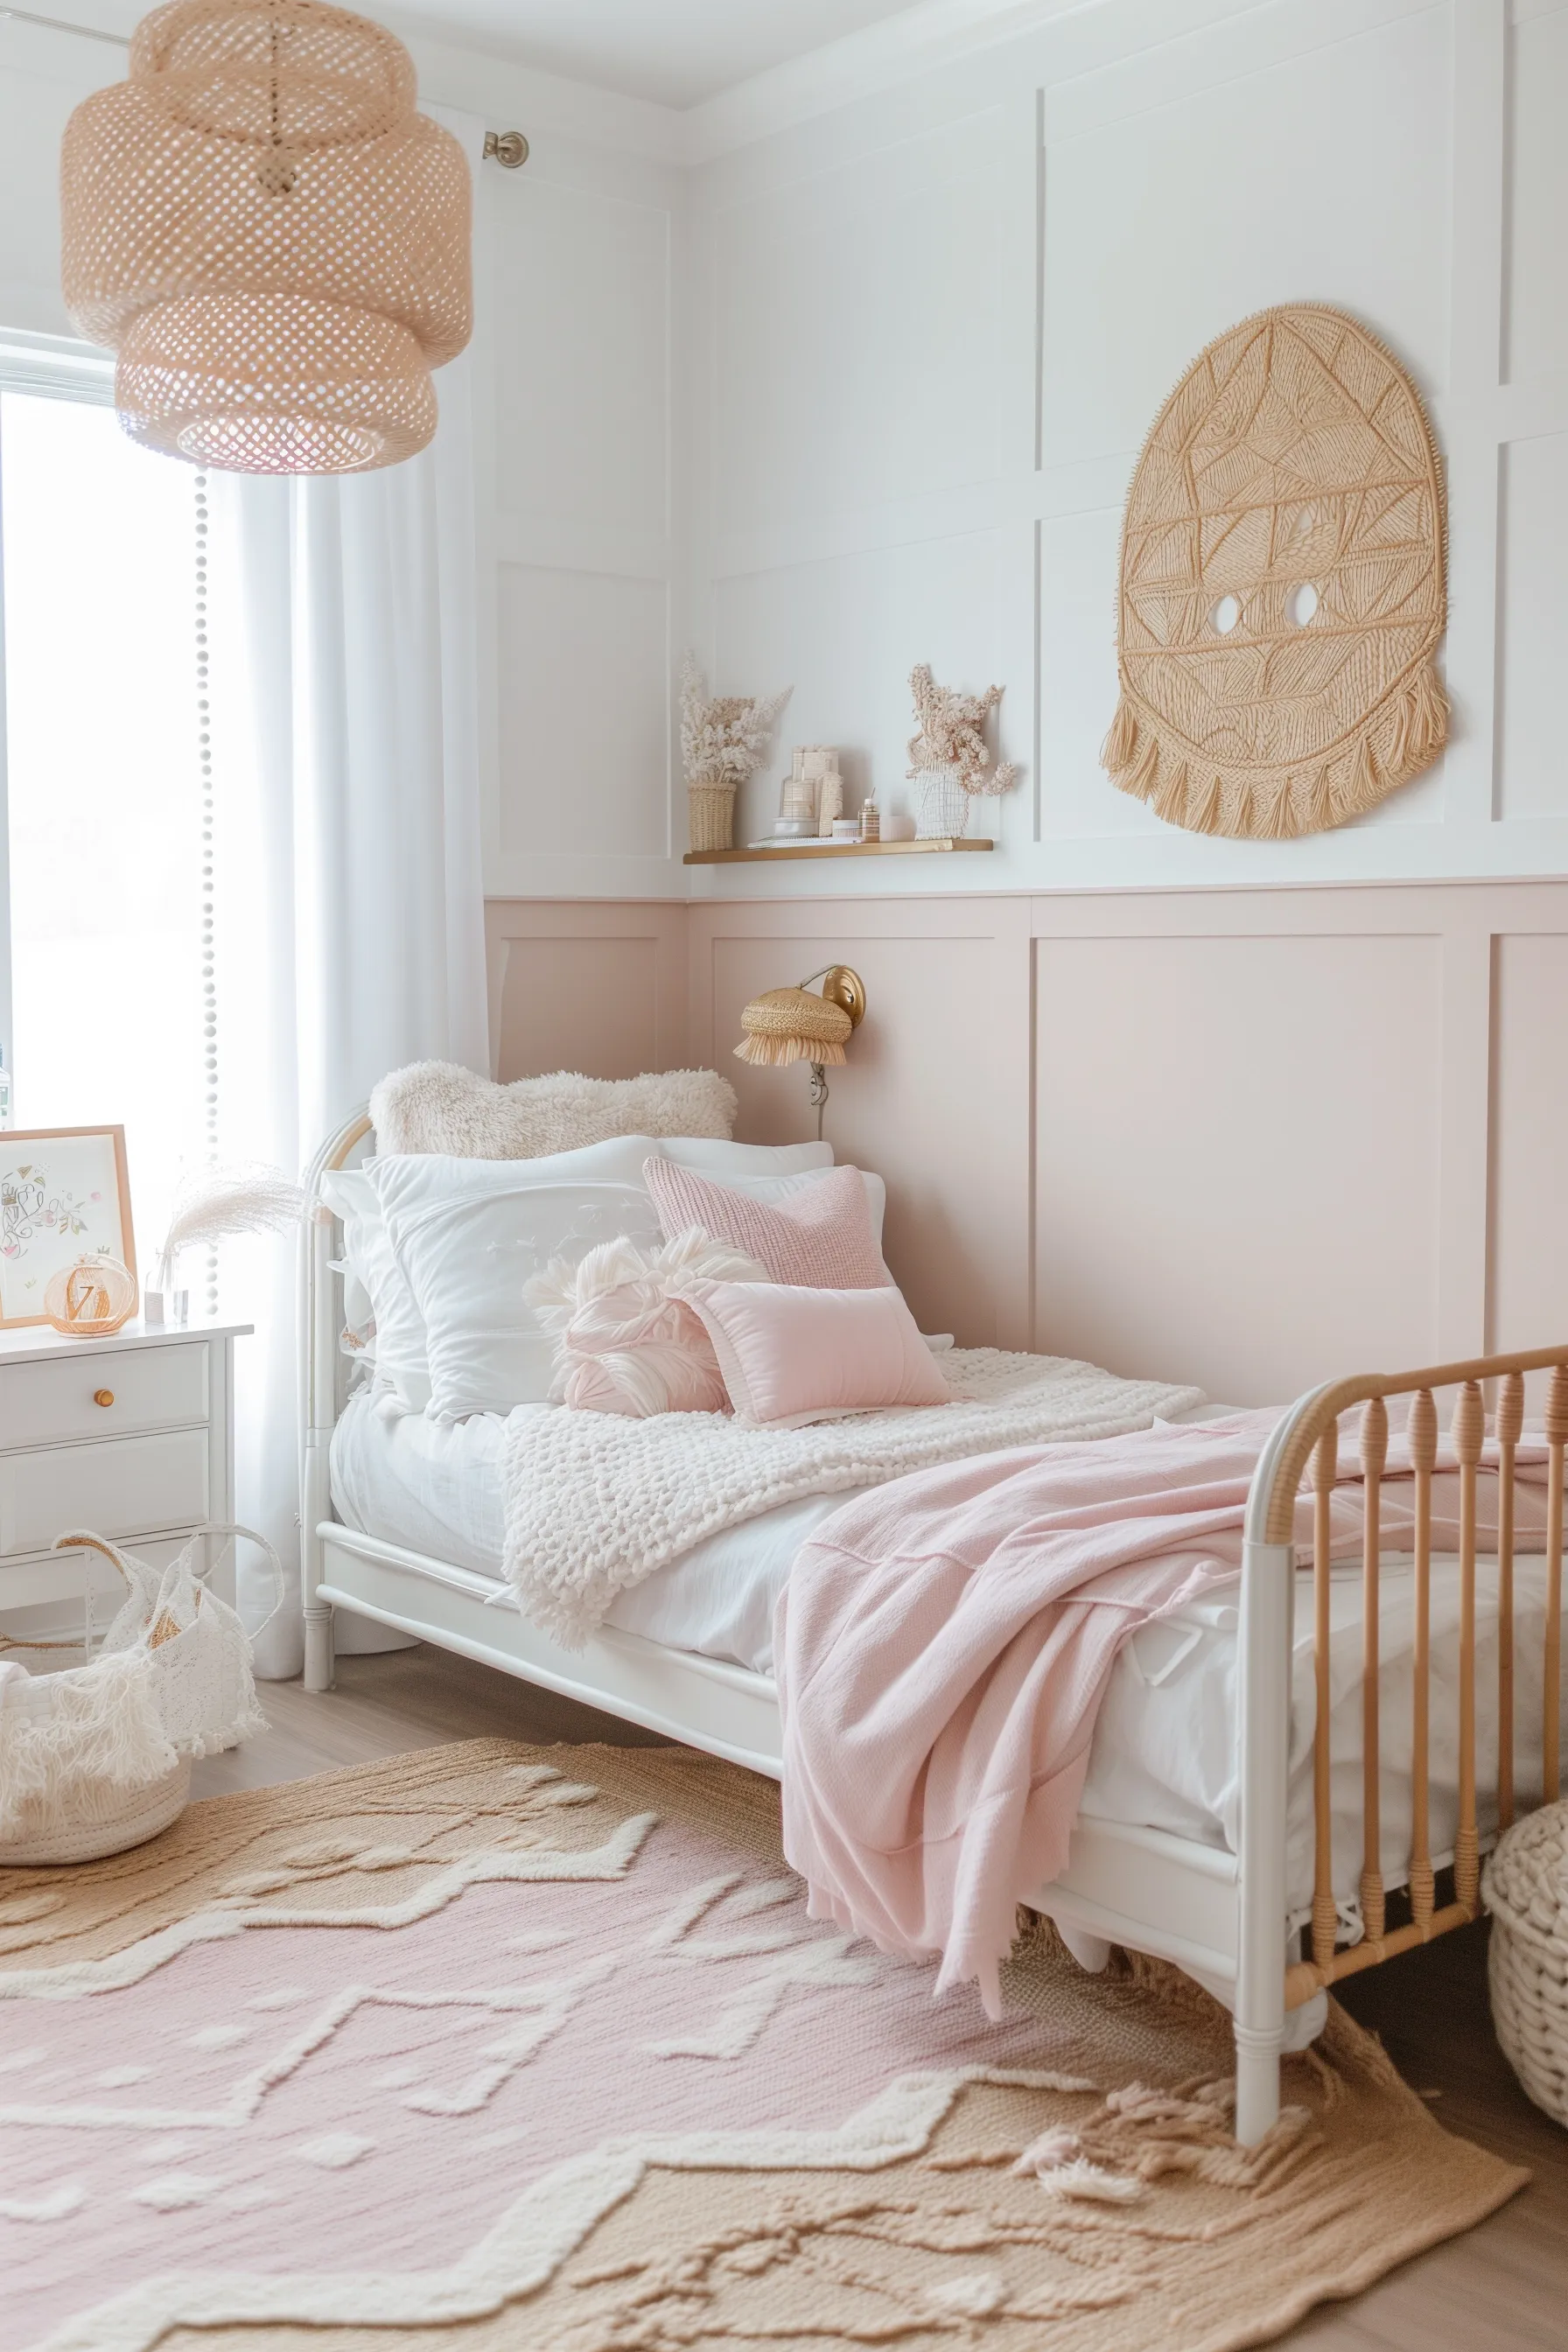 A pink and white bedroom with drawers and boho decor